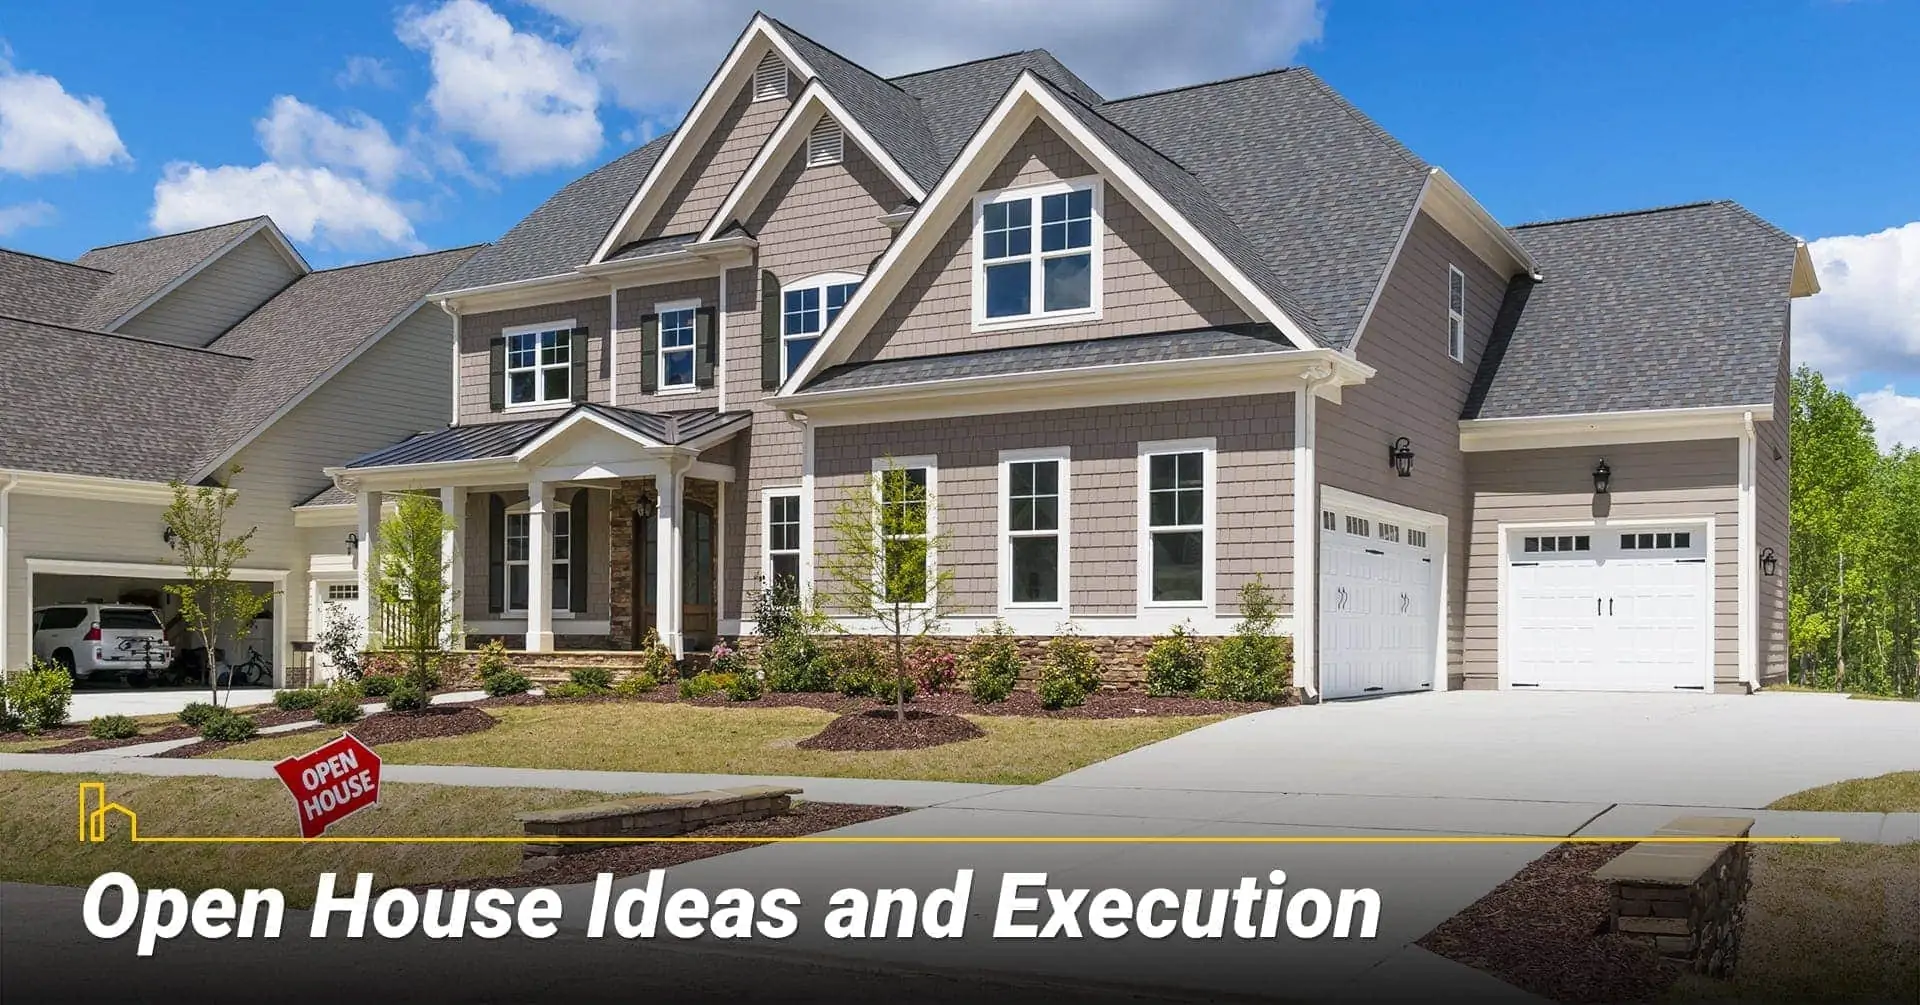 Open House Ideas and Execution, ways to attract potential home buyers